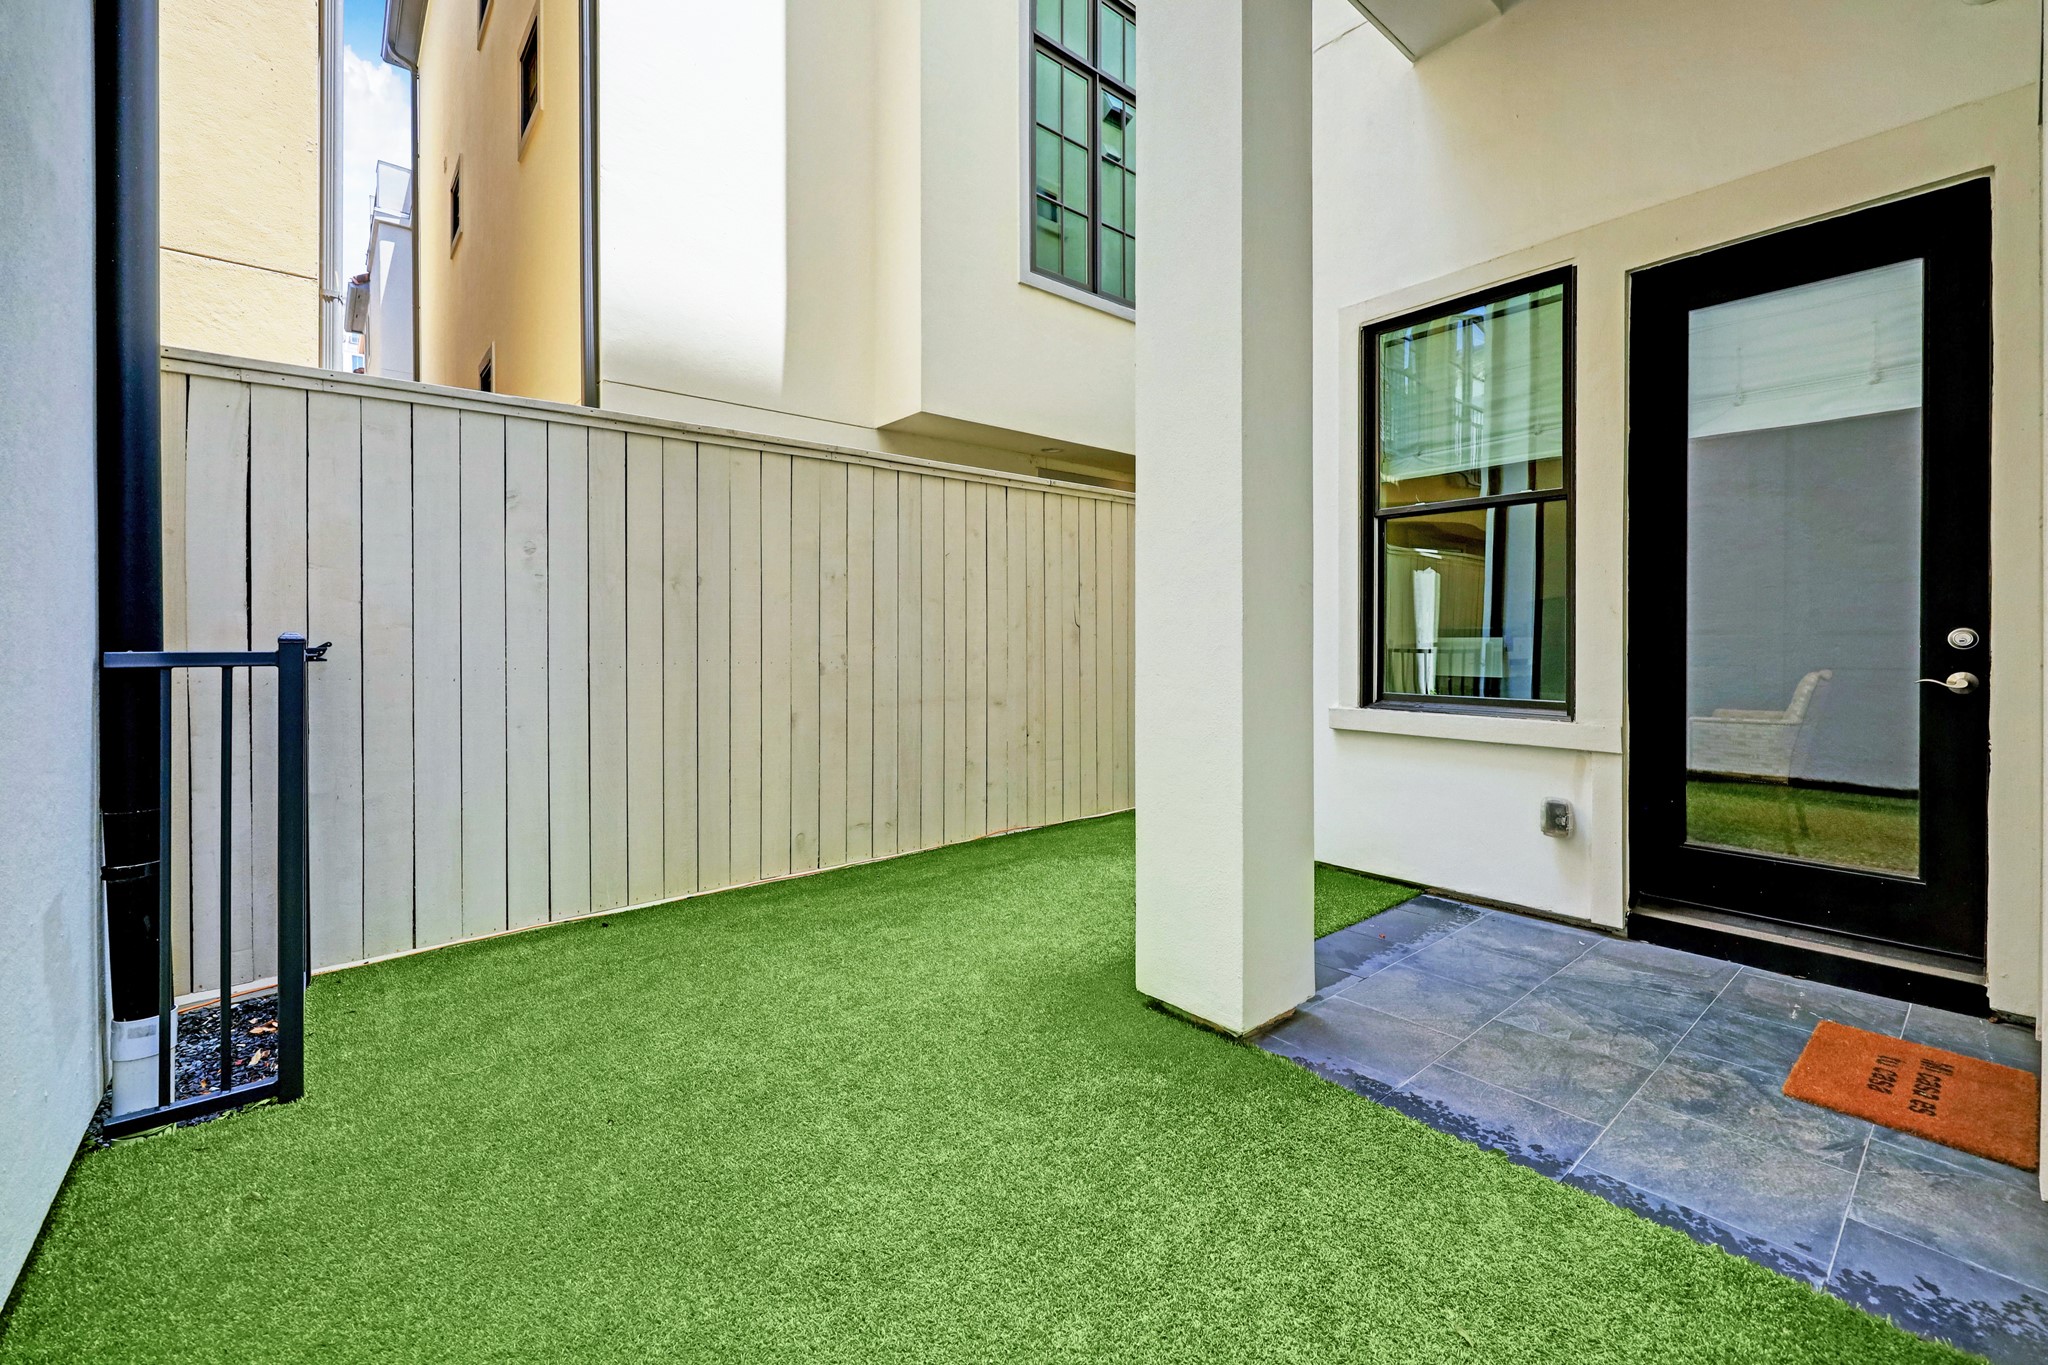 The turfed backyard is the perfect space for pets to roam or a place to entertain guests.